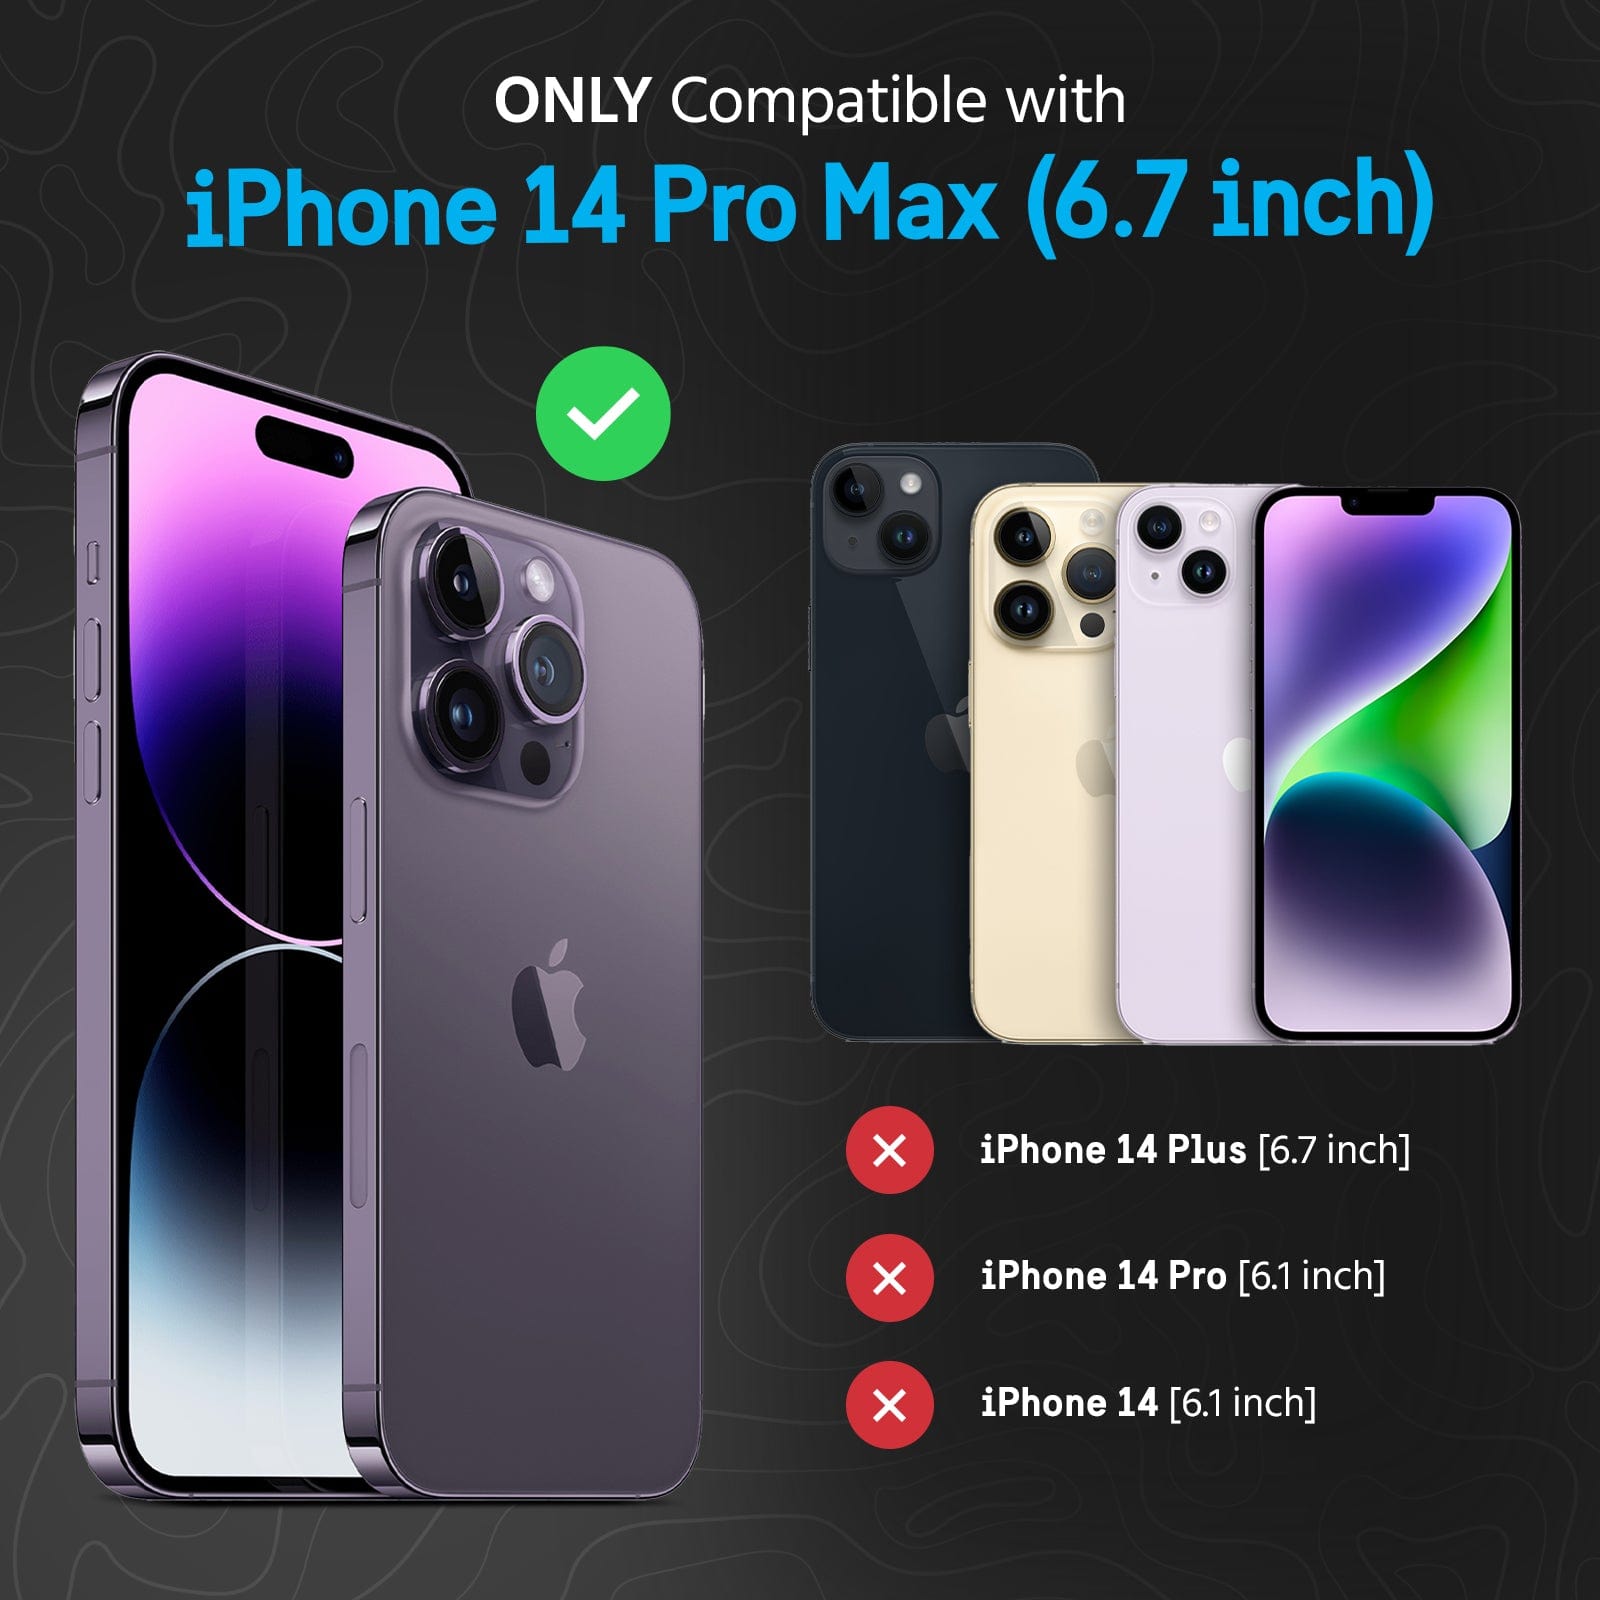 ONLY COMPATIBLE WITH IPHONE 14 PRO MAX